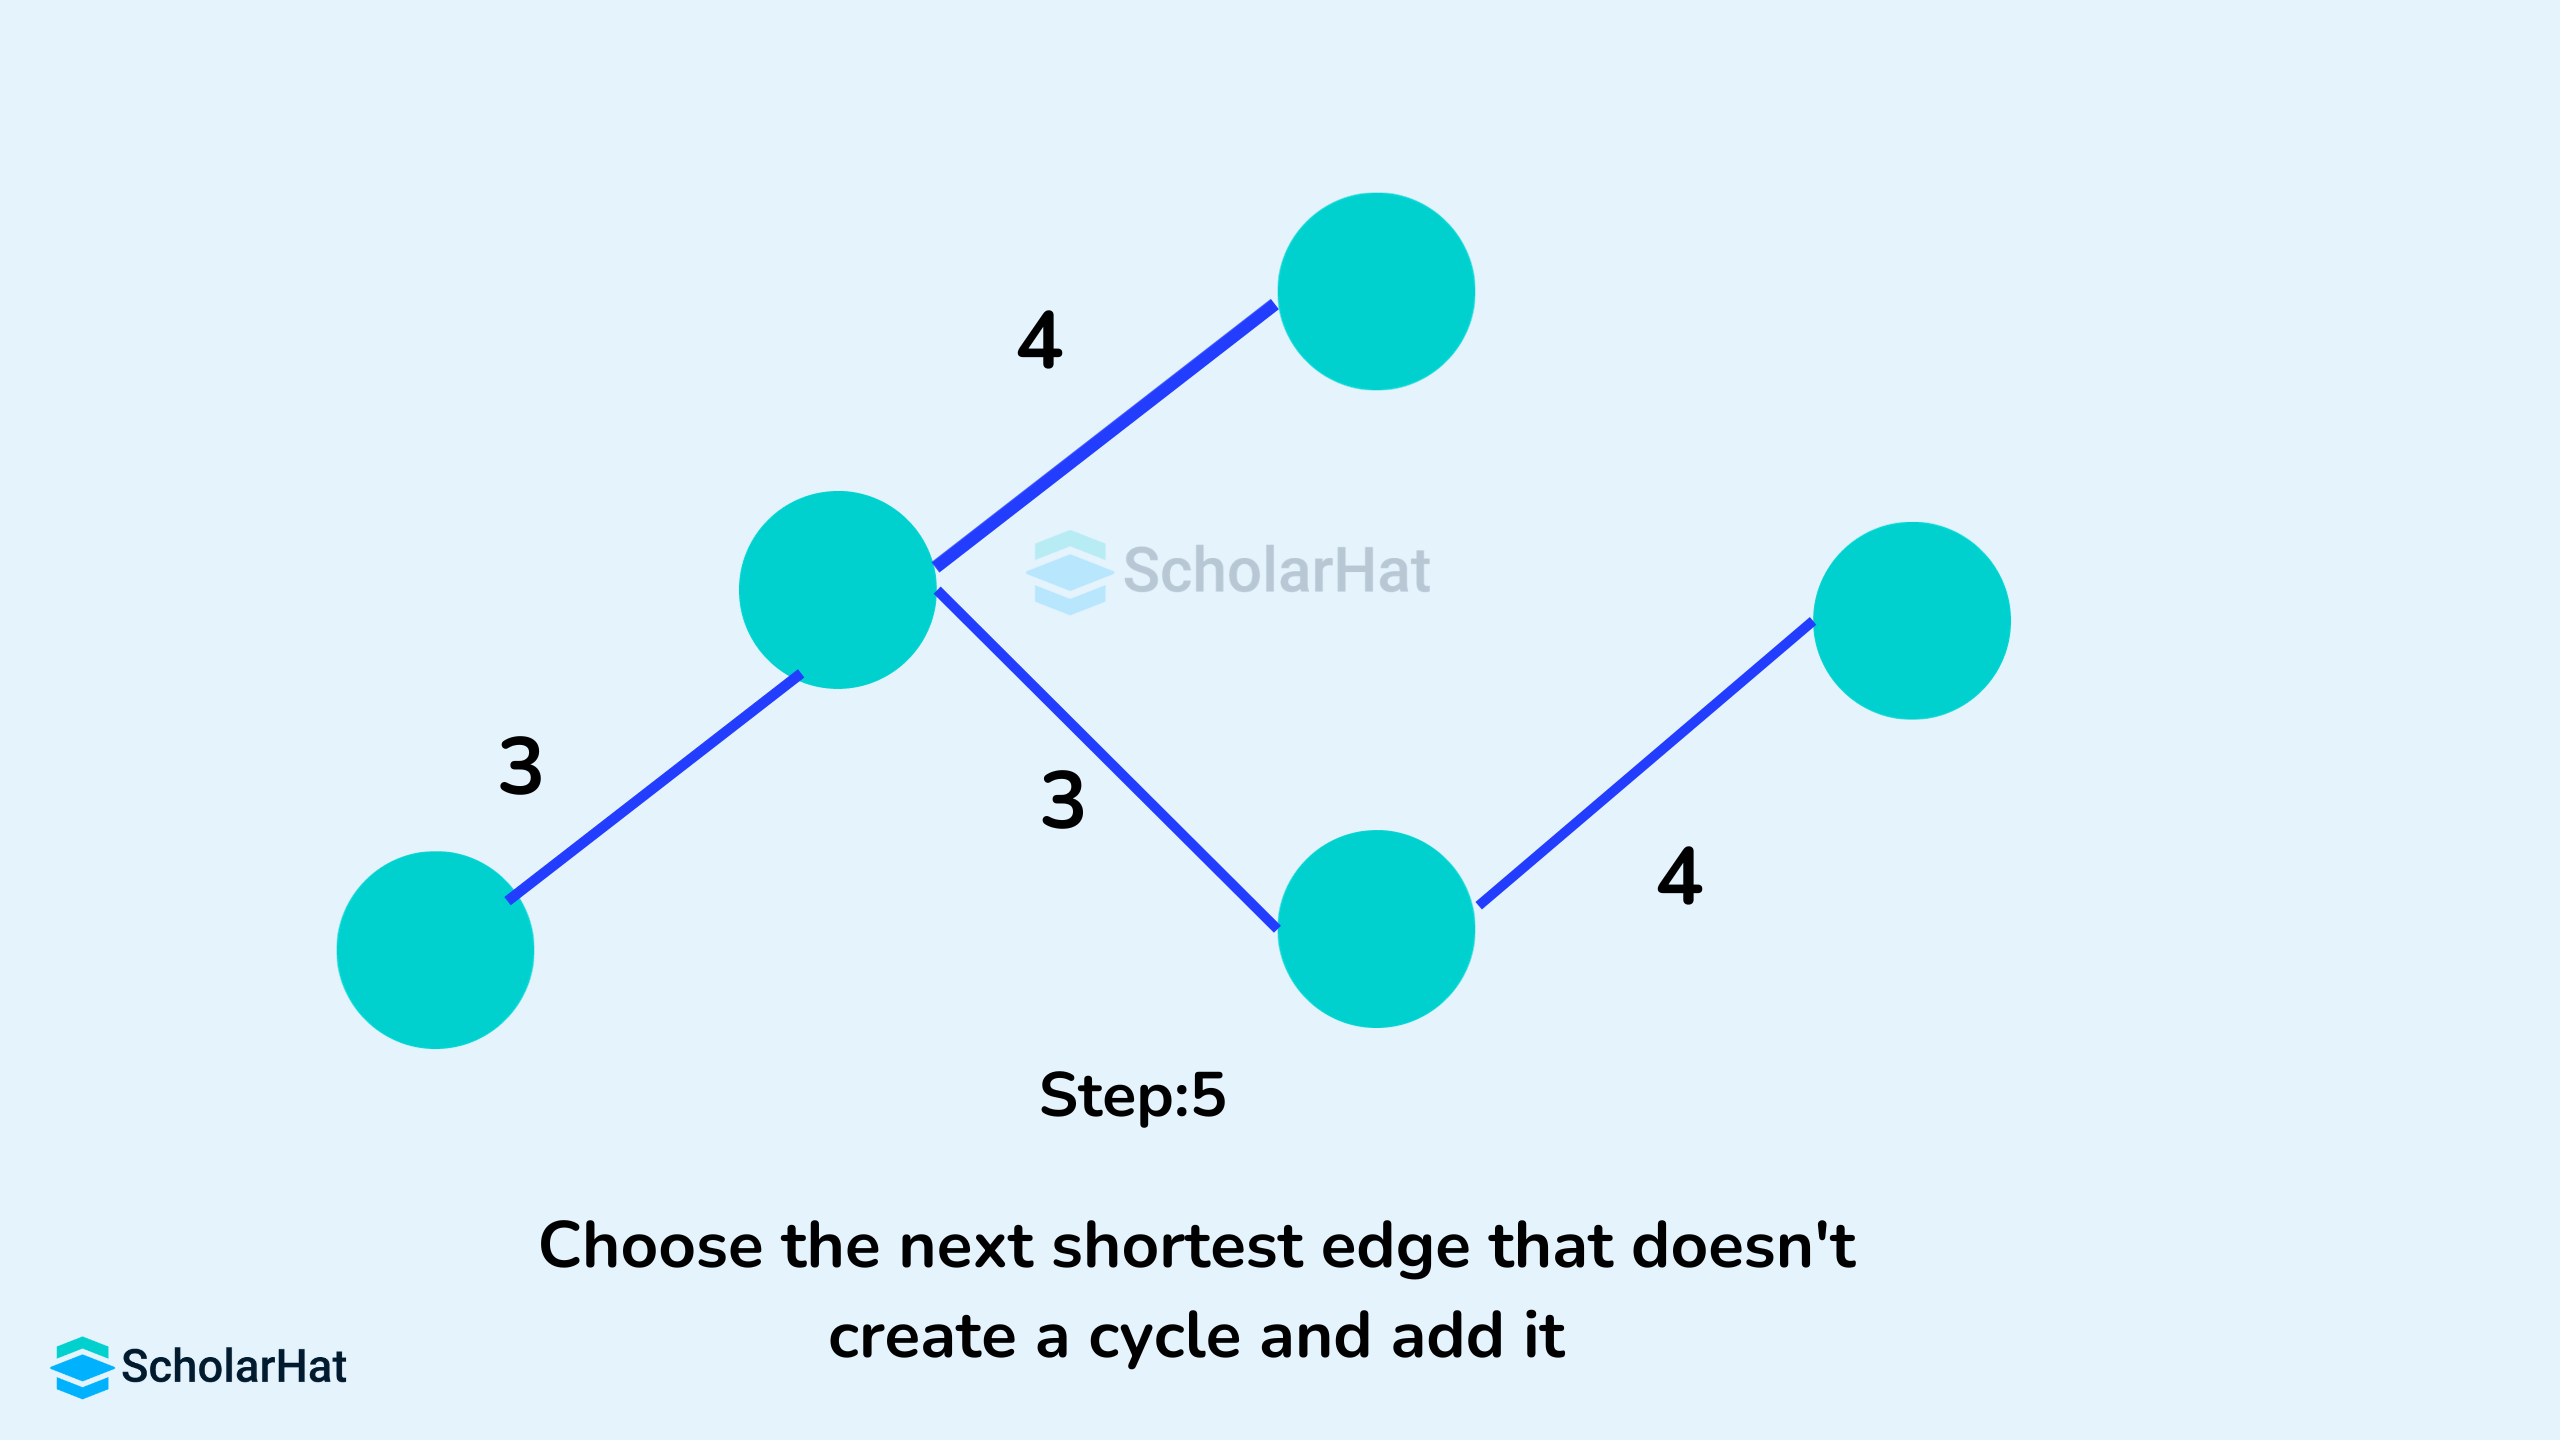 Choose the next shortest edge that doesn't create a cycle and add it